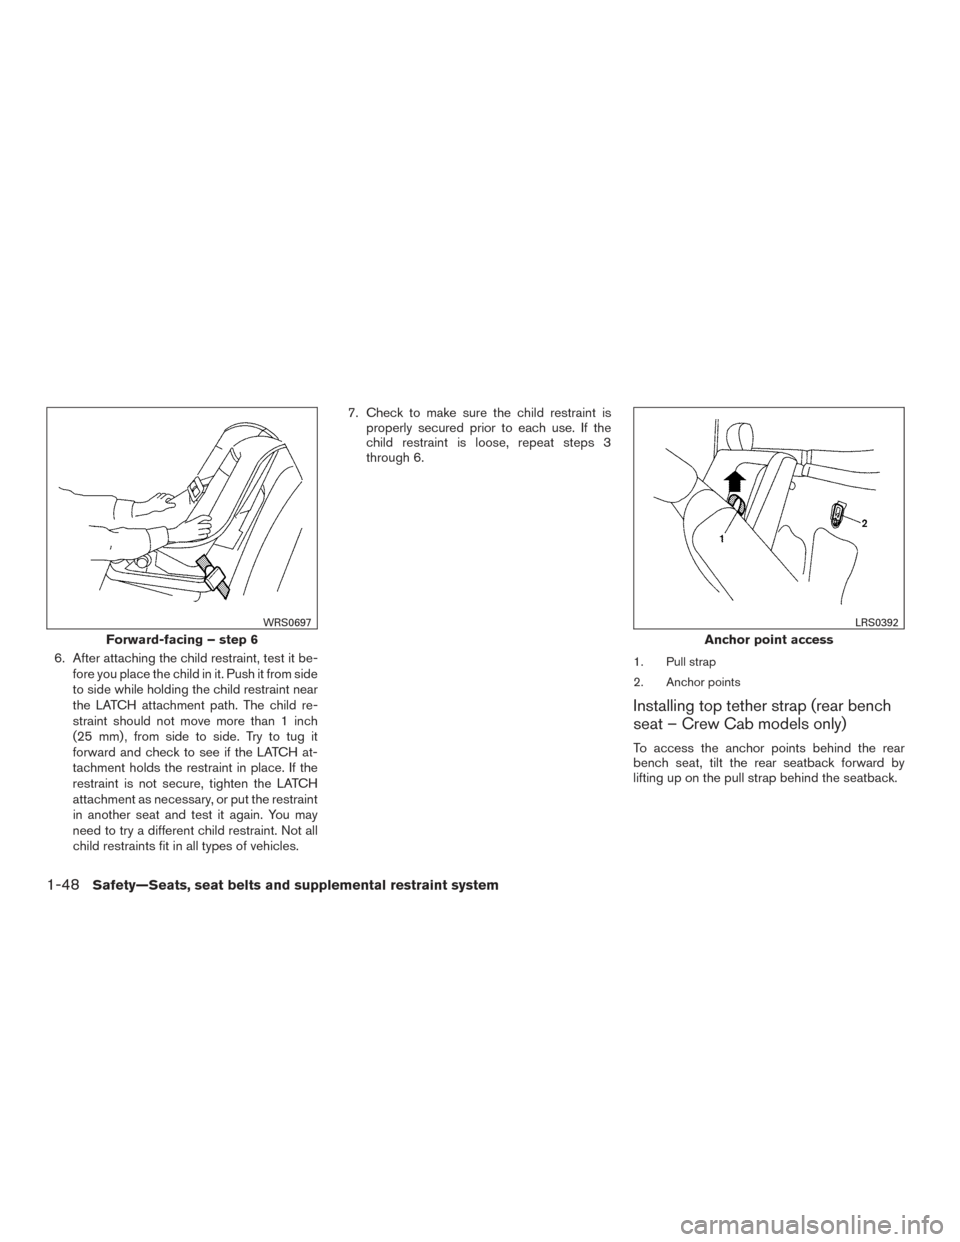 NISSAN FRONTIER 2015 D23 / 3.G Repair Manual 6. After attaching the child restraint, test it be-fore you place the child in it. Push it from side
to side while holding the child restraint near
the LATCH attachment path. The child re-
straint sho